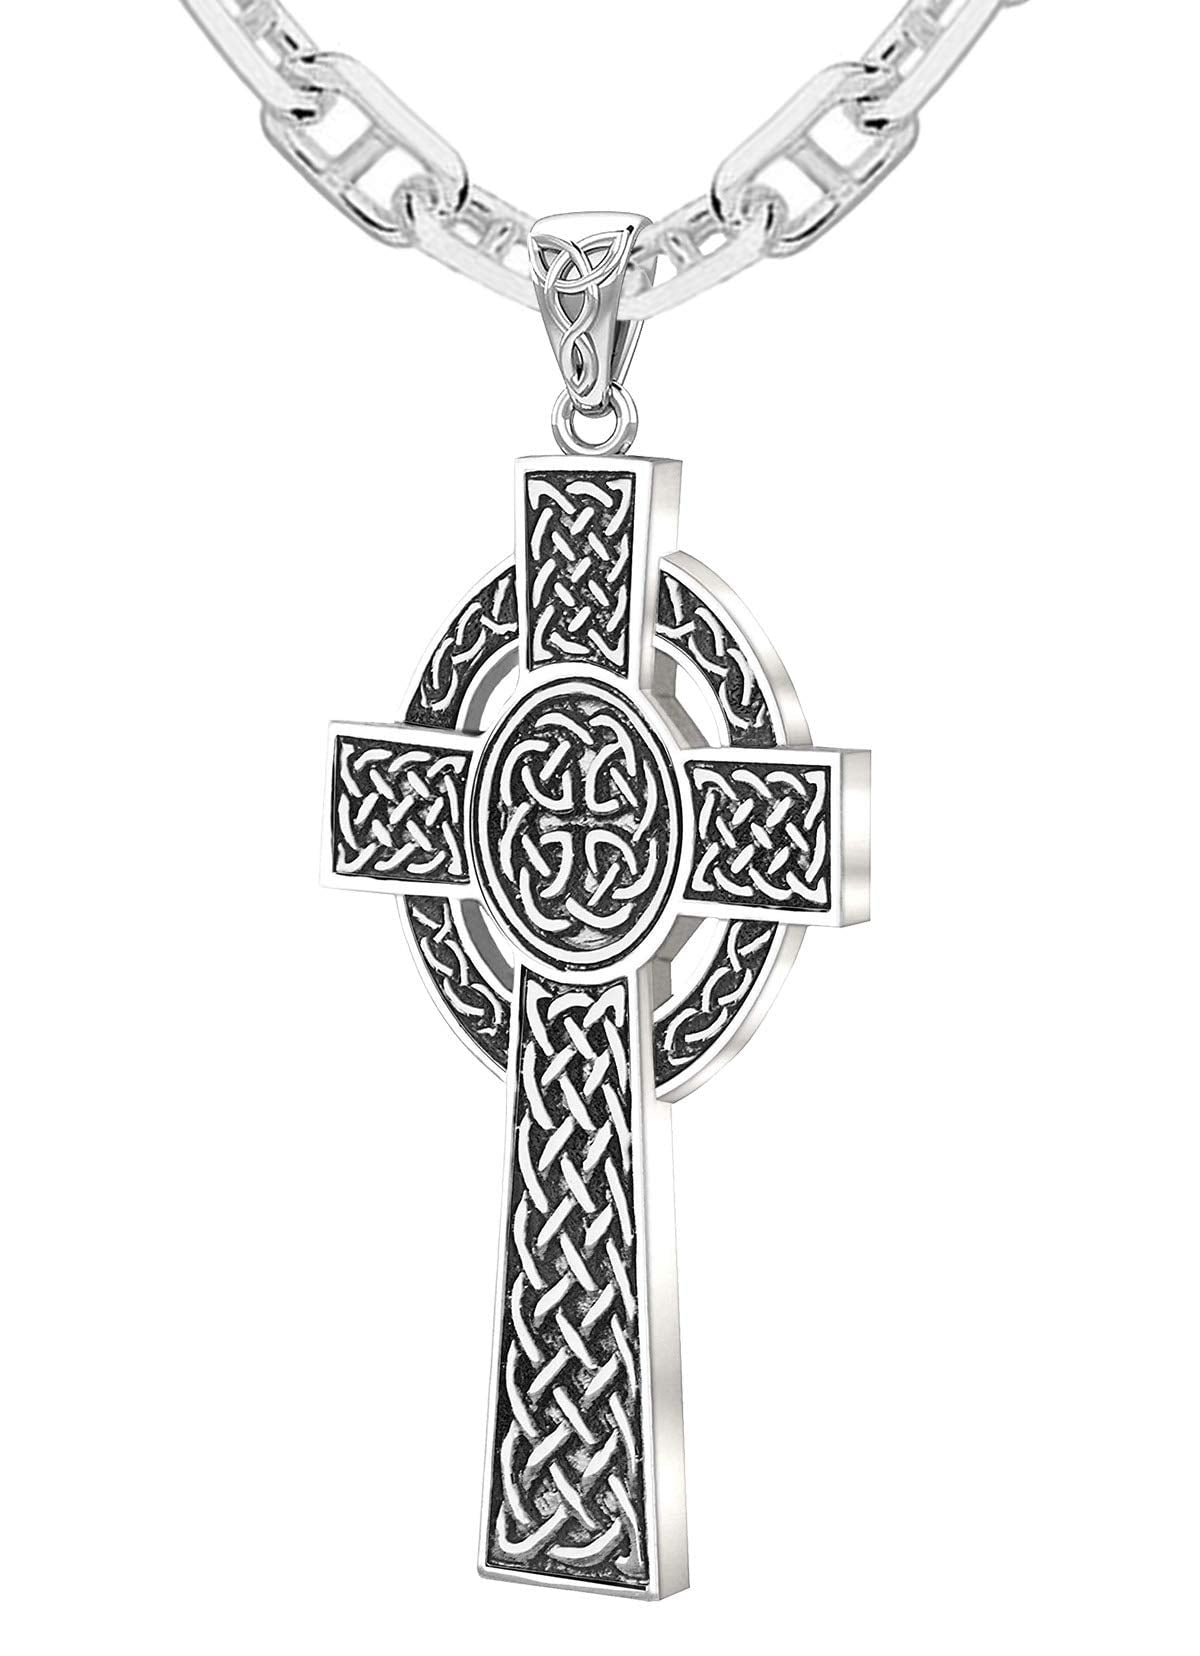 Mens Celtic Cross Necklace Sterling Silver Mens Irish - Etsy | Mens celtic  cross necklace, Cross jewelry, Irish jewelry